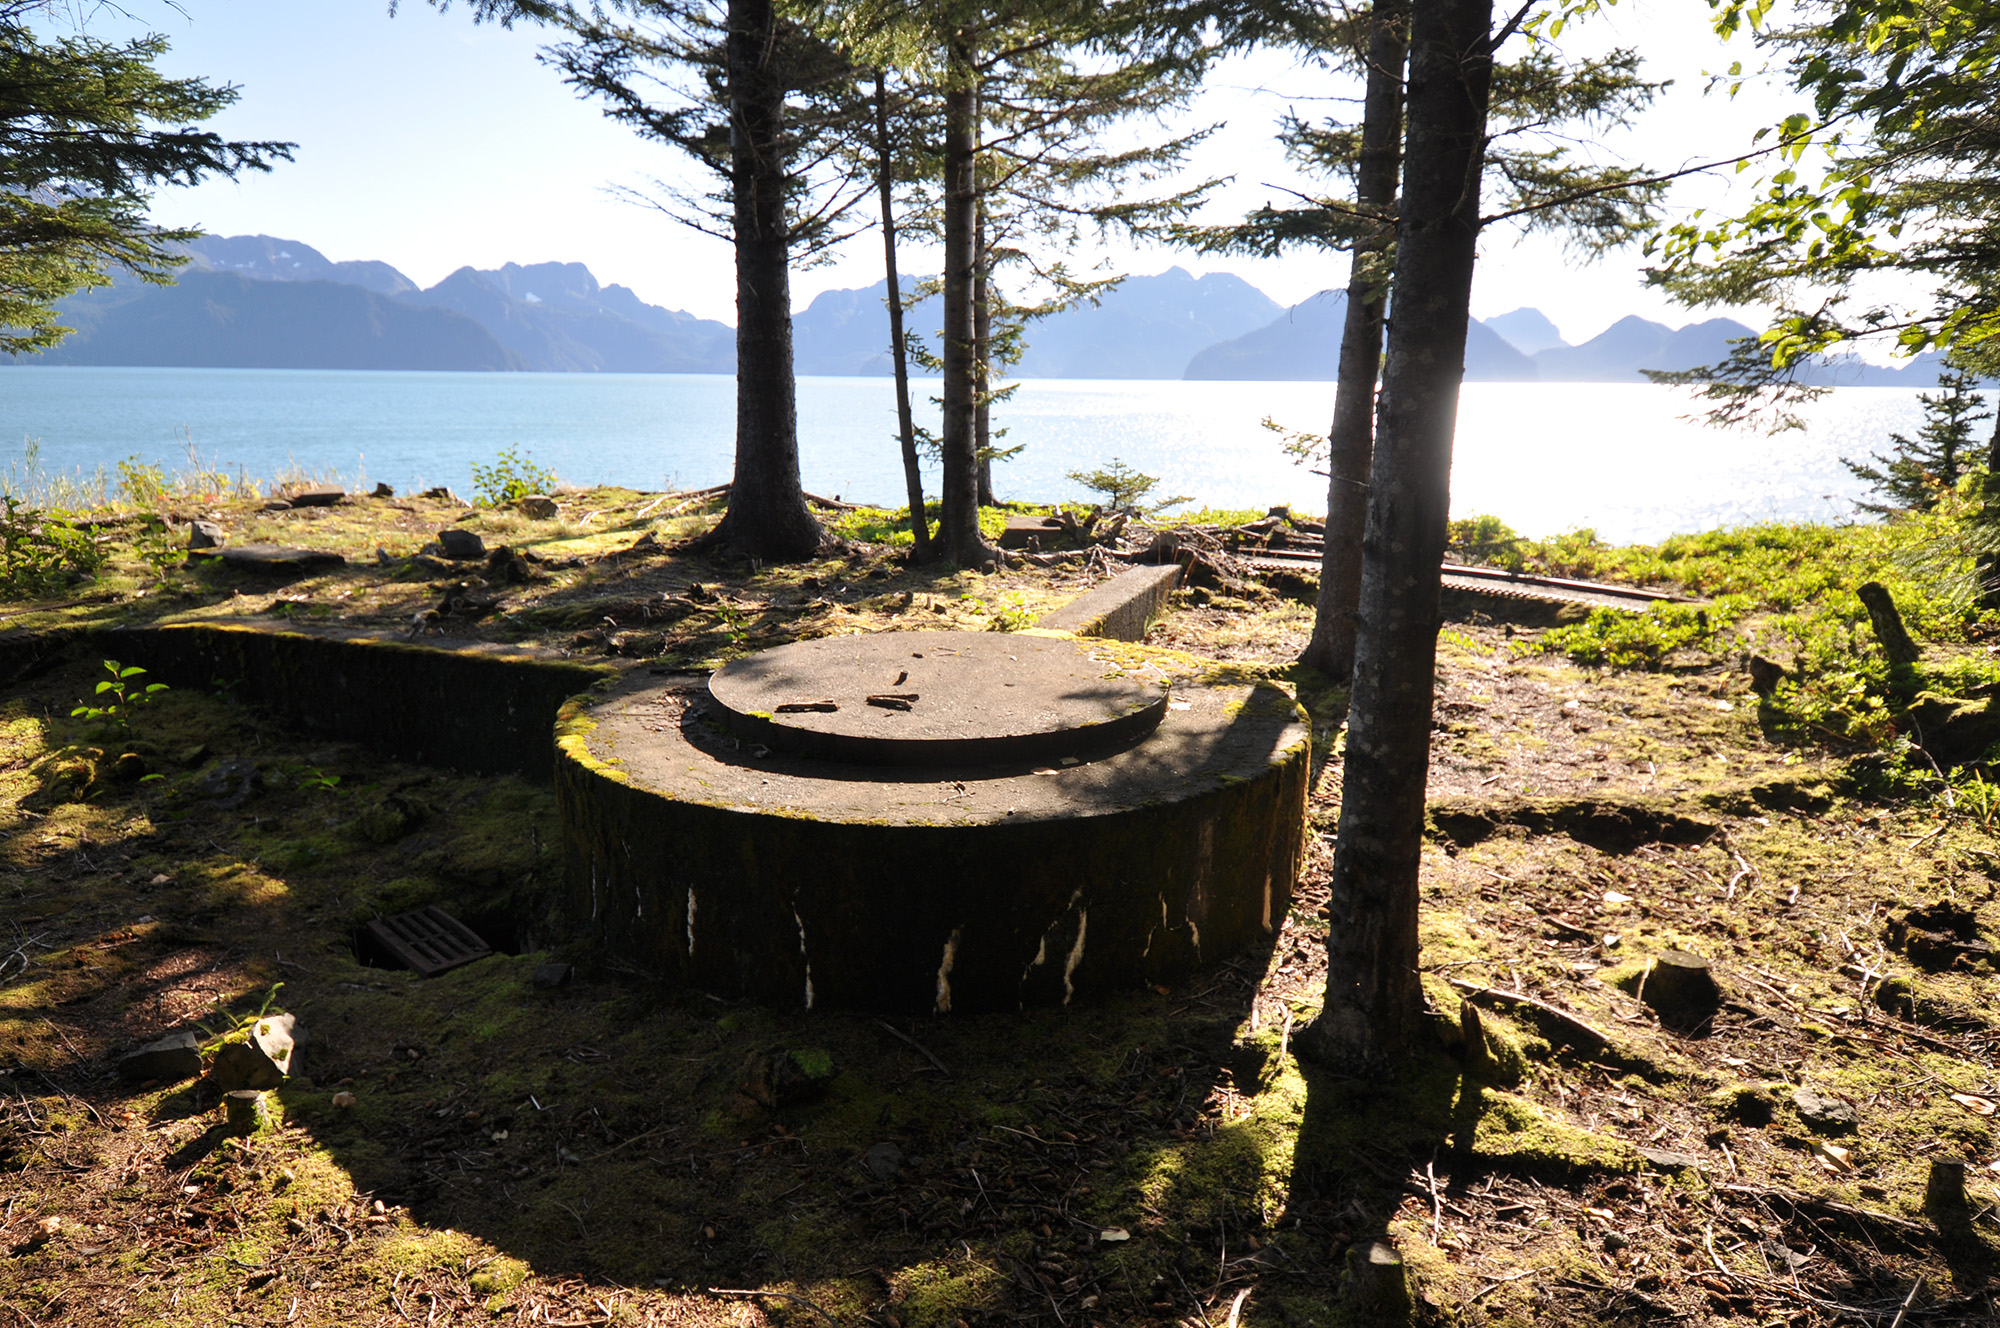 The Panama mount 155 guns at Rocky Point offer visitors a panorama view of Resurrection Bay. September 2021